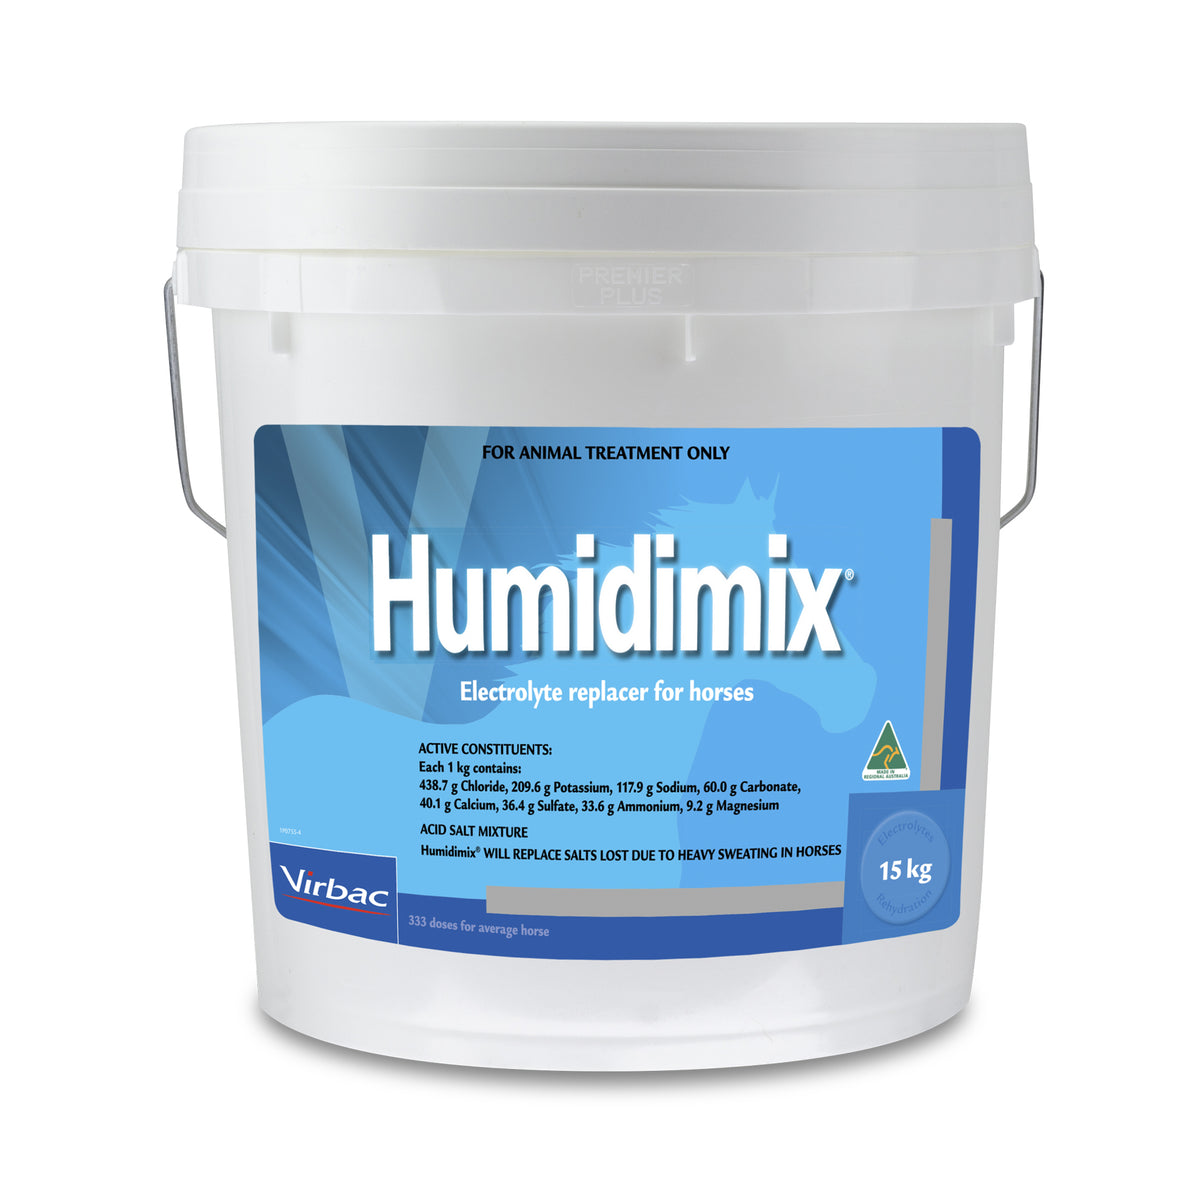 Humidimix Electrolyte Replacer for Horses